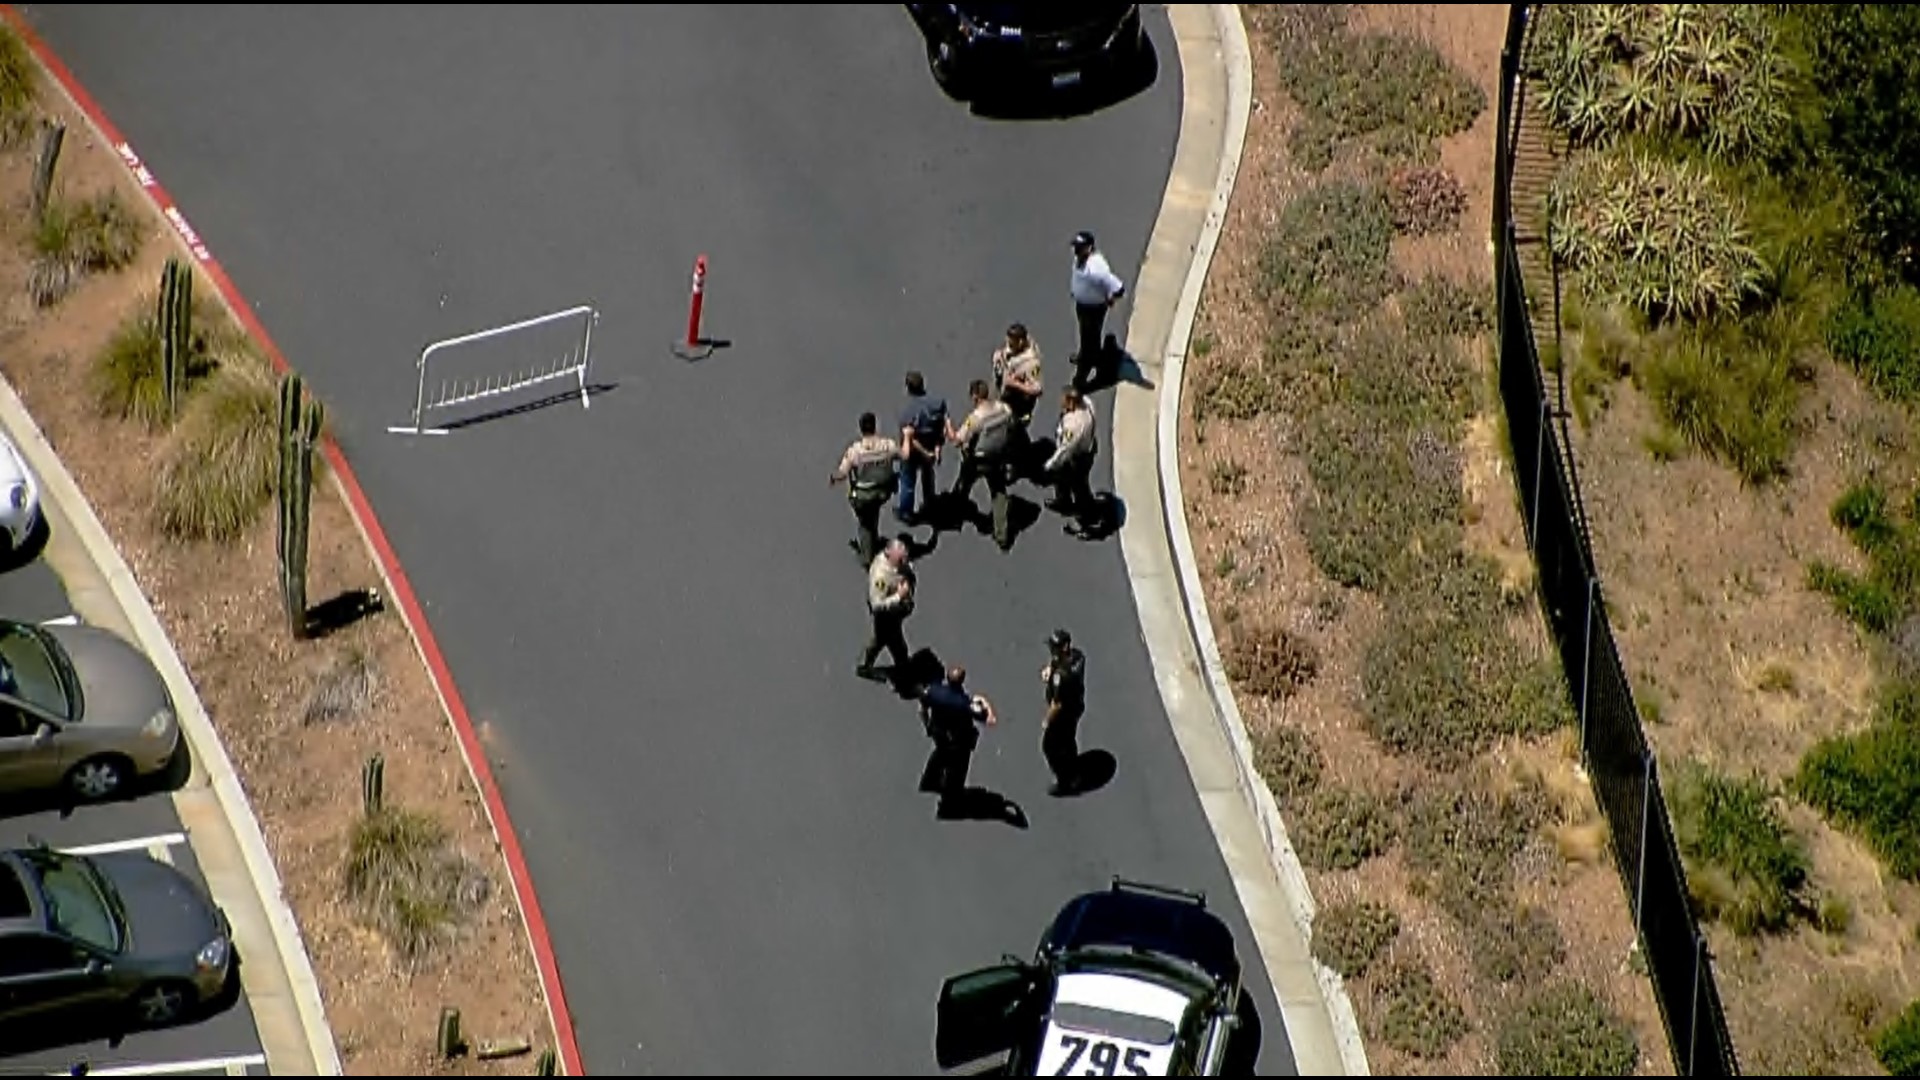 San Diego Sheriff’s Department deputies were in pursuit of a vehicle in North County San Diego Monday.